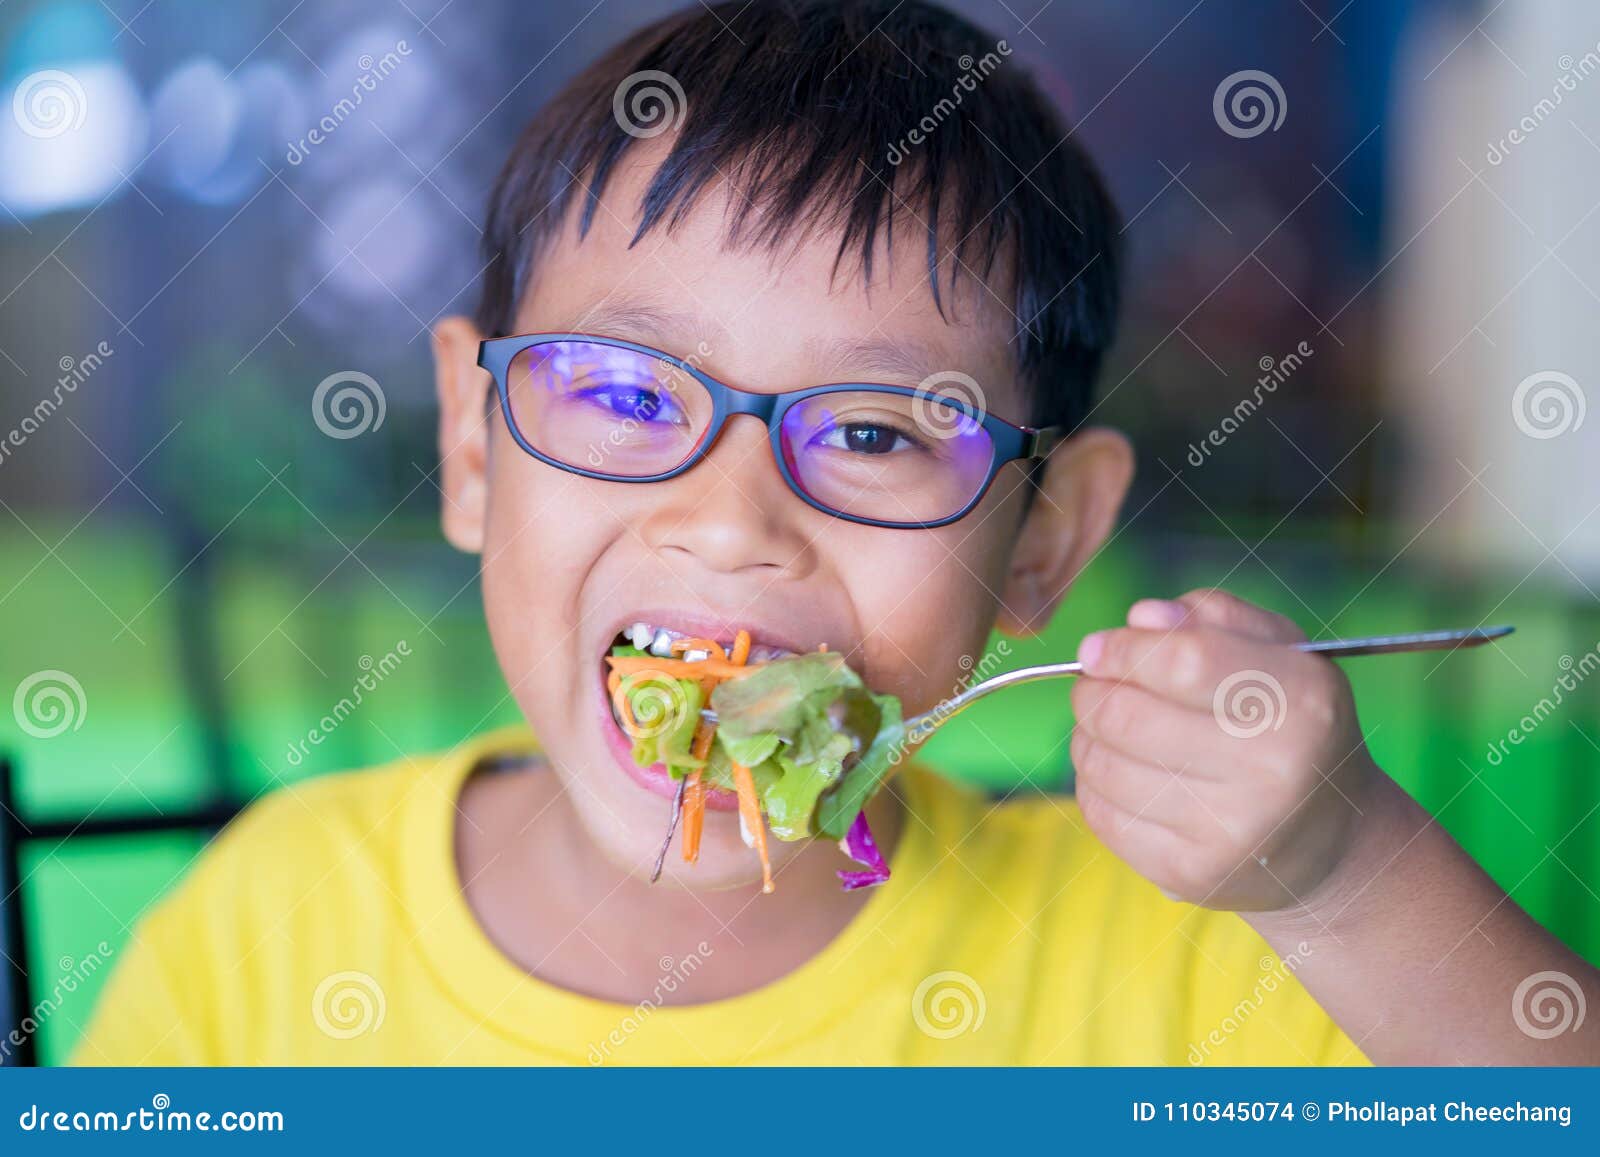 asian children wear glasses with blue light blocking and eating